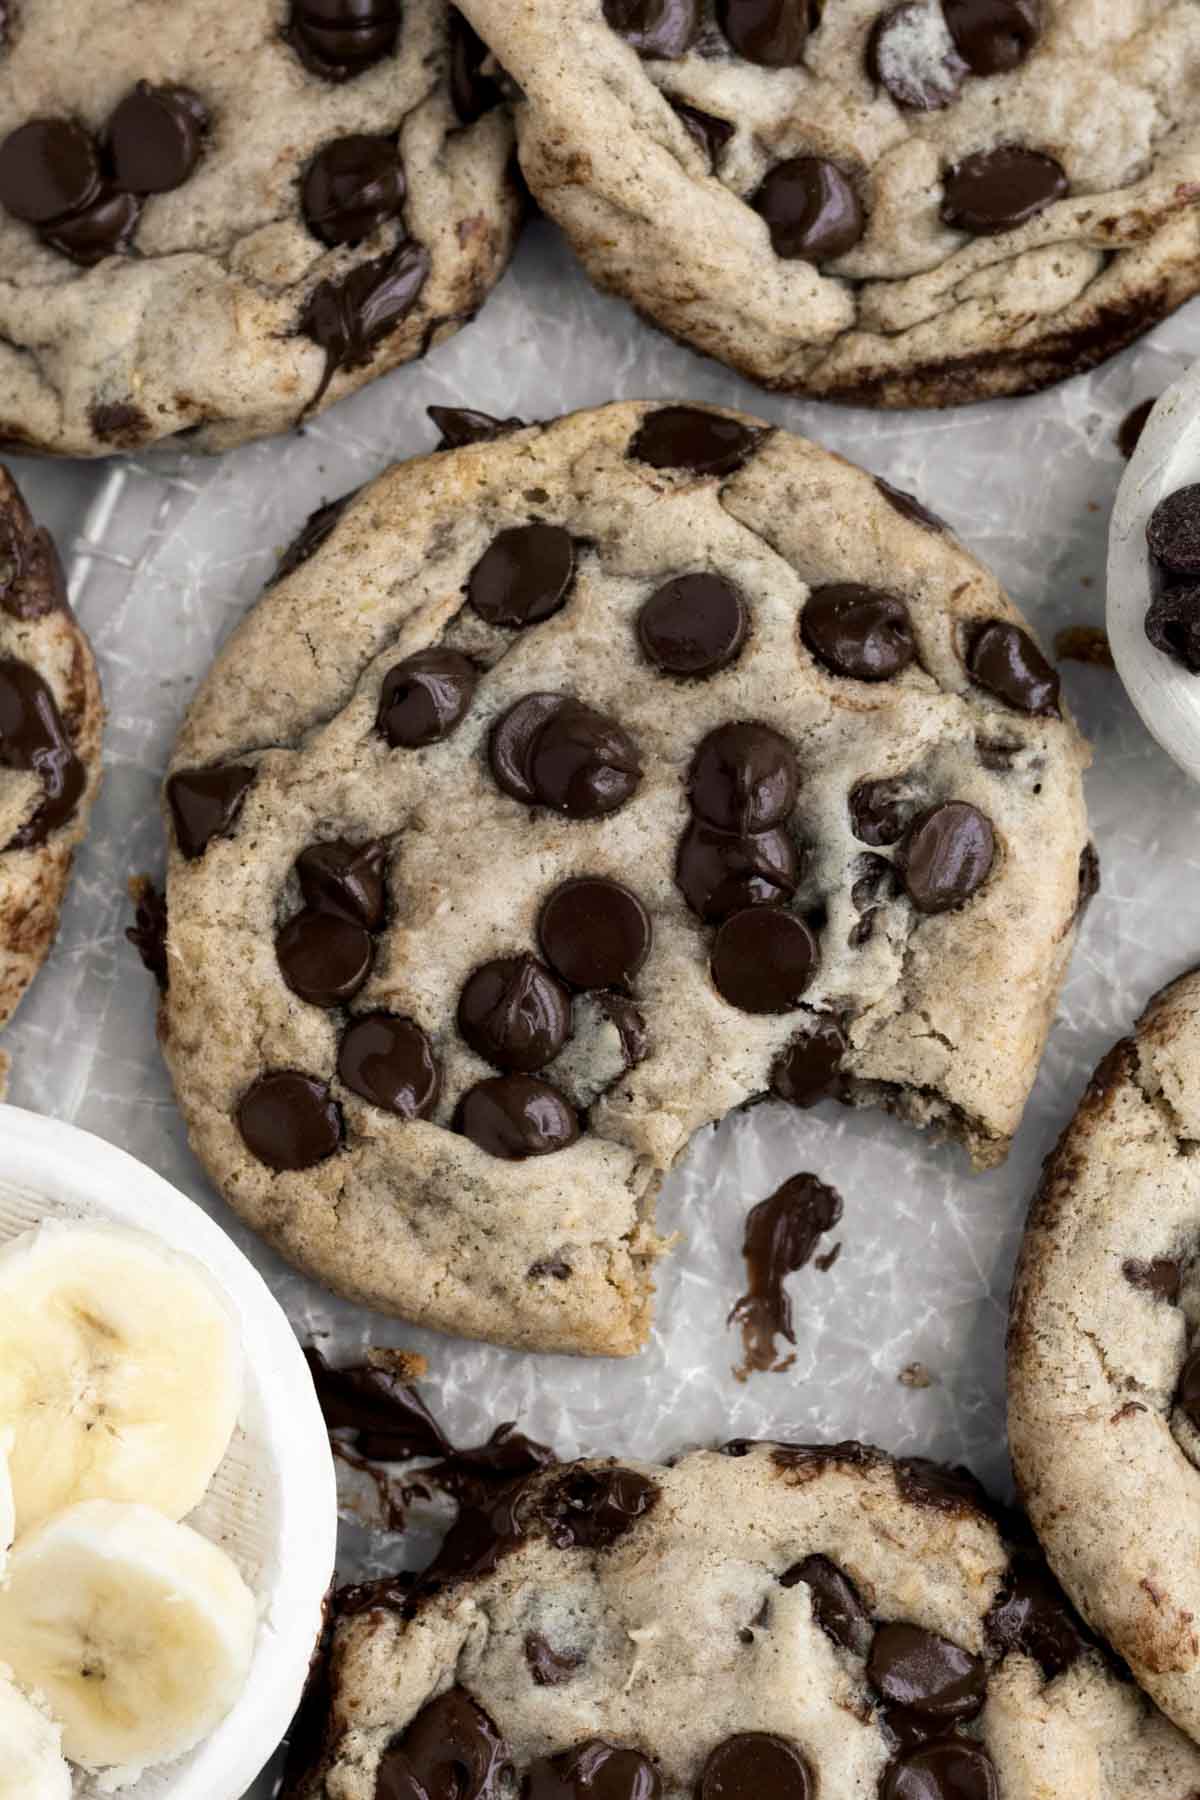 Melted chocolate chips accentuate the banana flavor in the delicious gluten free Banana Bread Cookie.